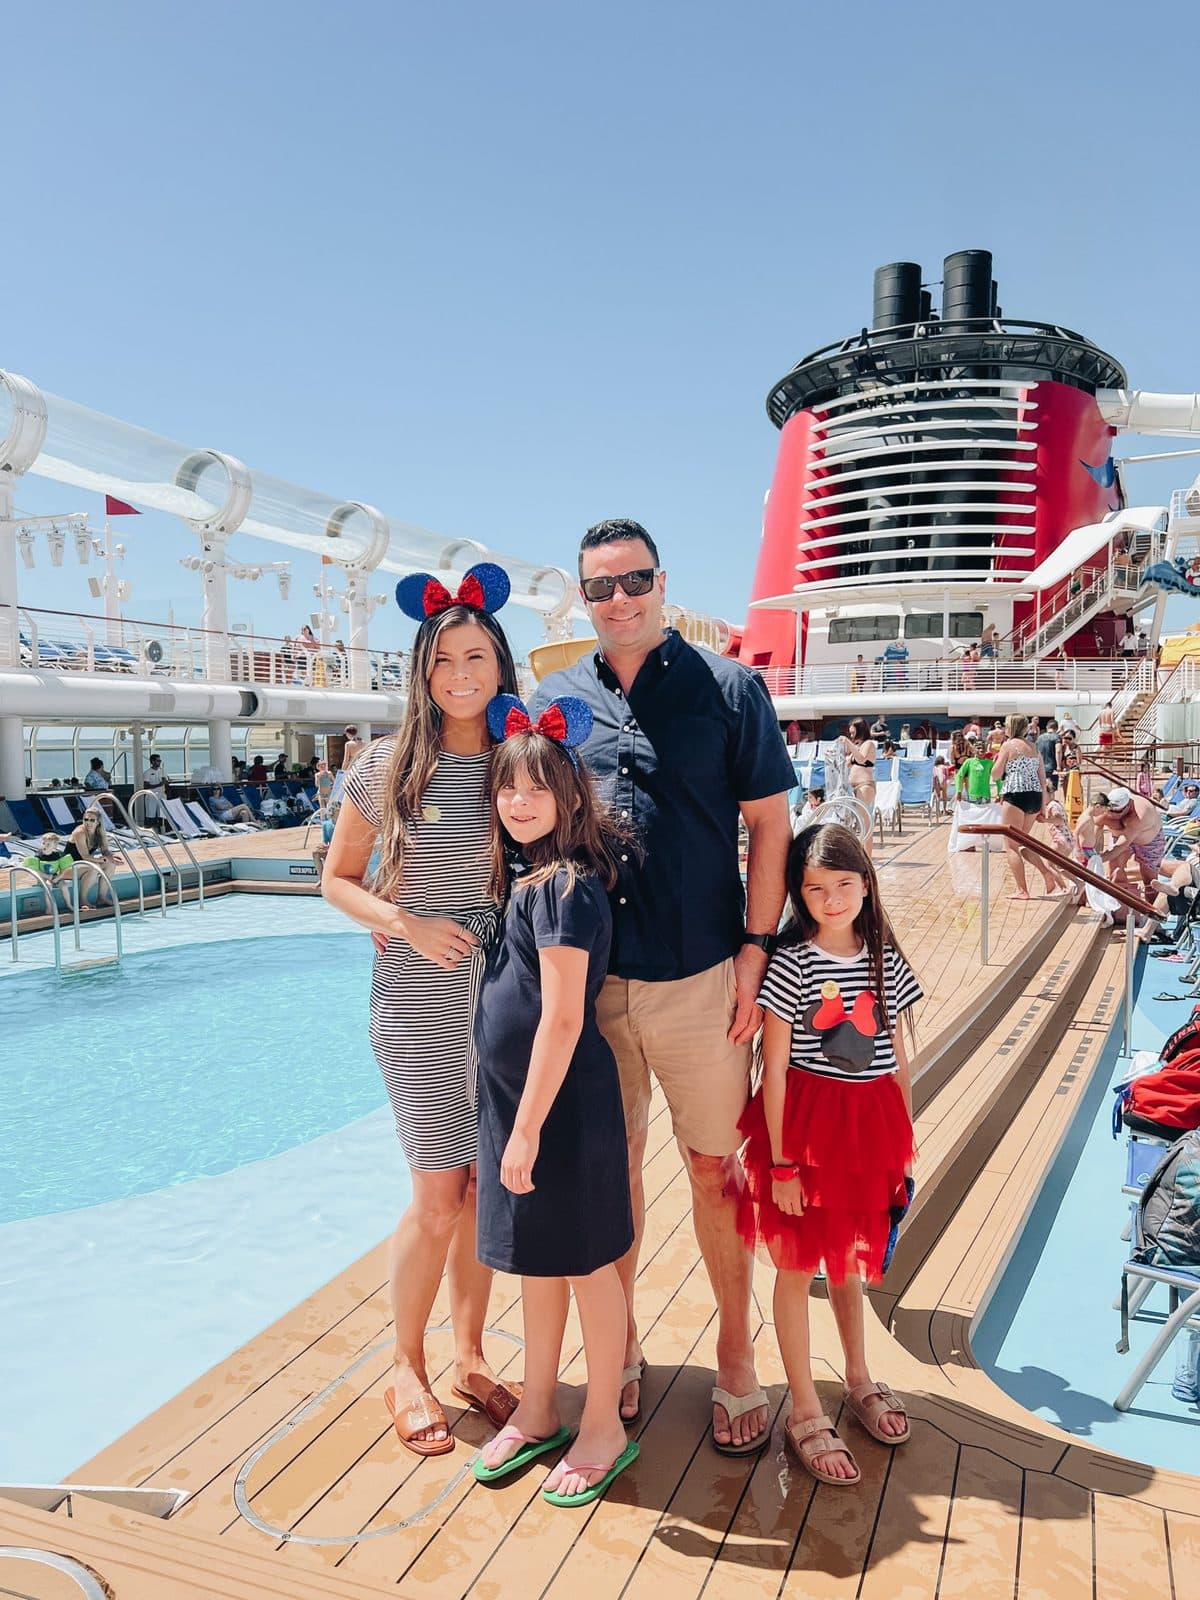 Disney Cruise Pirate Night Guide: What to Know Before You Go